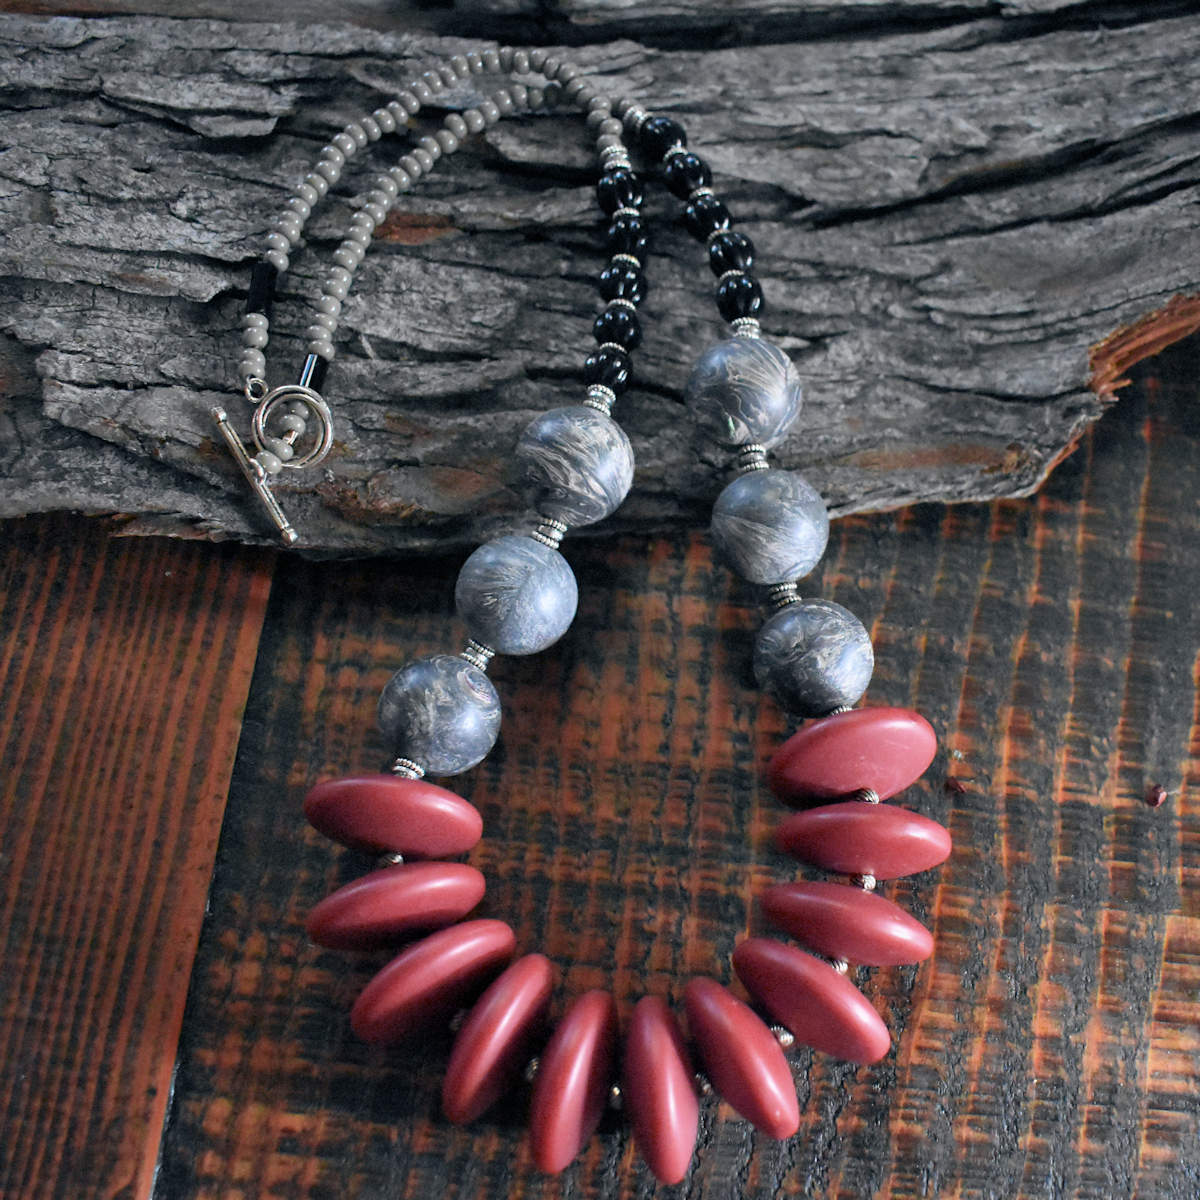 A chunky necklace with mauve and gray beads is draped on a wood backdrop. The necklace has eleven large mauve disc beads in the center, then three gray and cream swirled beads on each side. The necklace is finished with five larger black beads and a few inches of gray seed beads. The clasp is a silver toggle.